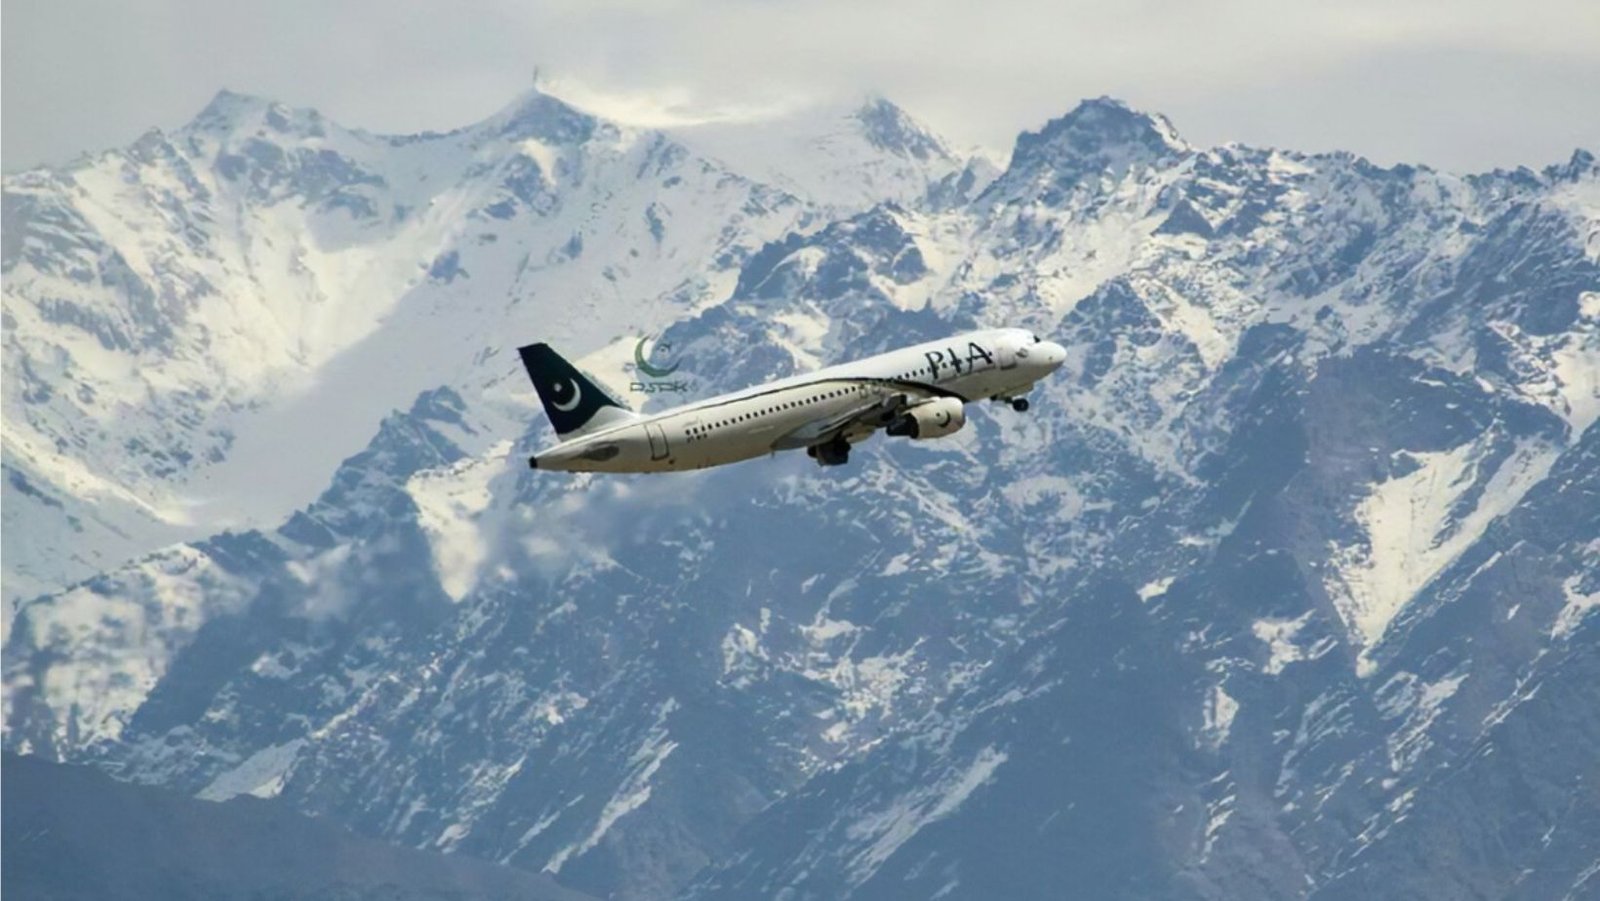 PIA Increases the Number of Direct Flights to Skardu